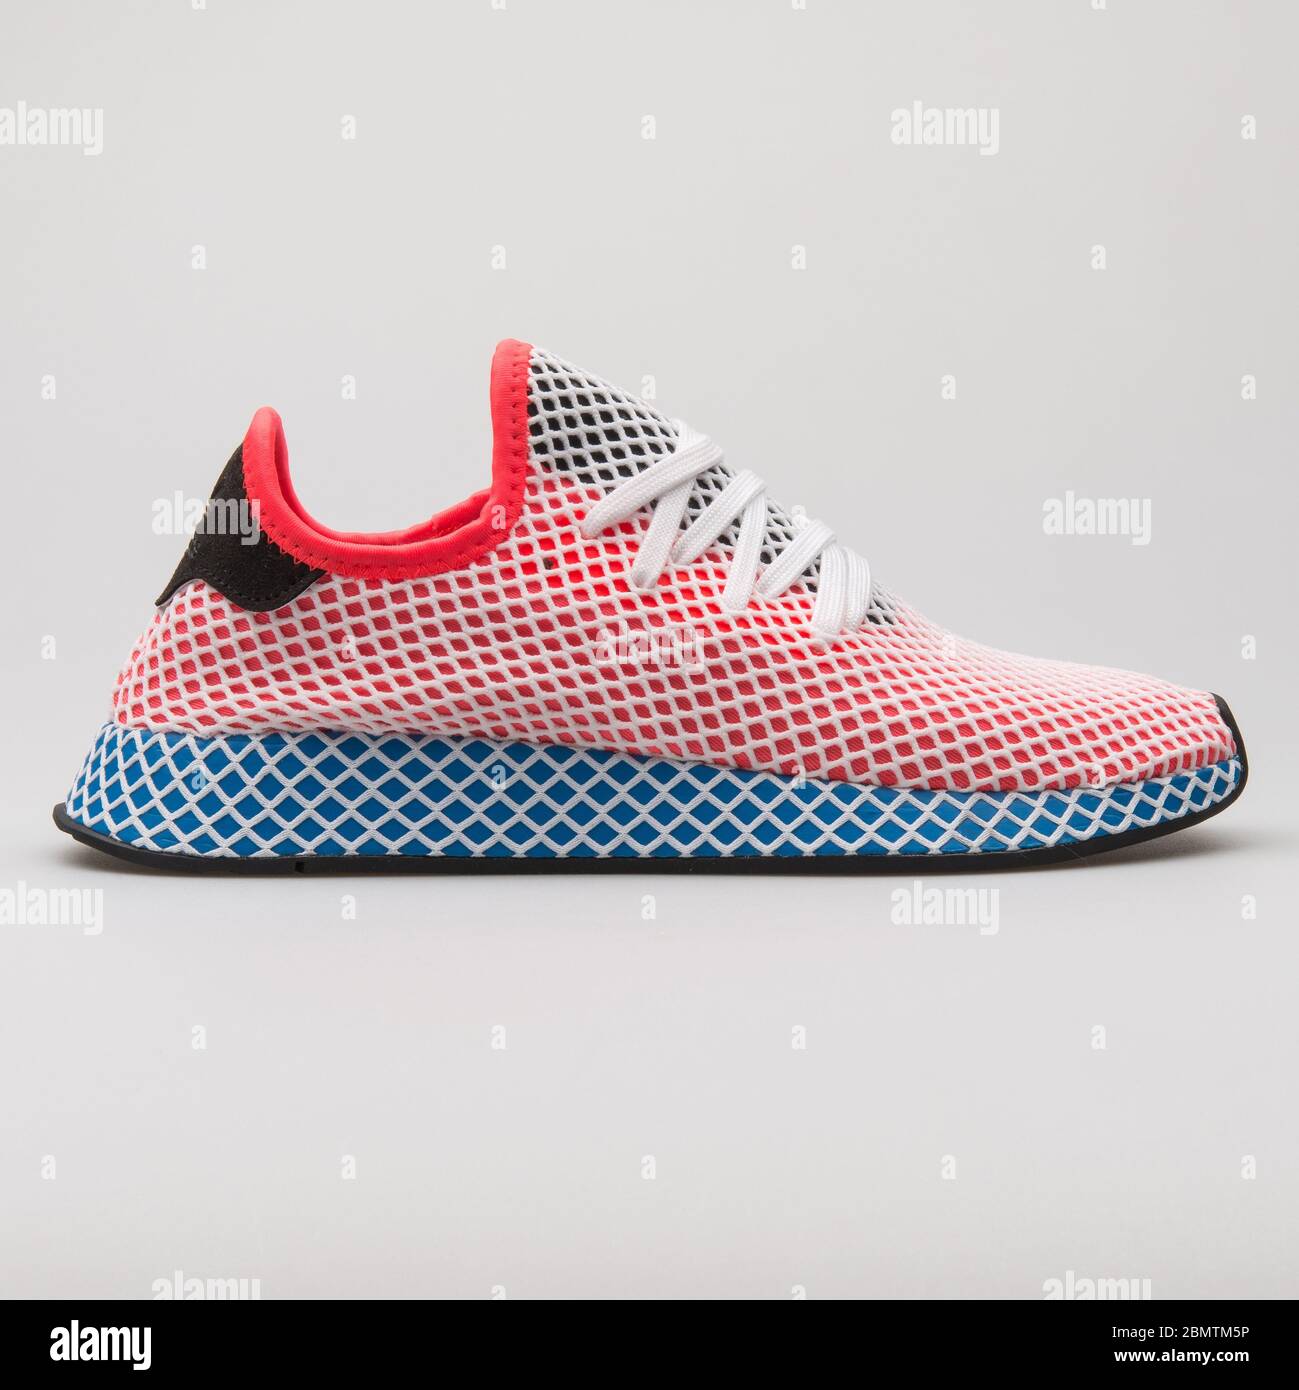 VIENNA, AUSTRIA - FEBRUARY 19, 2018: Adidas Deerupt Runner red, blue and  white sneaker on white background Stock Photo - Alamy